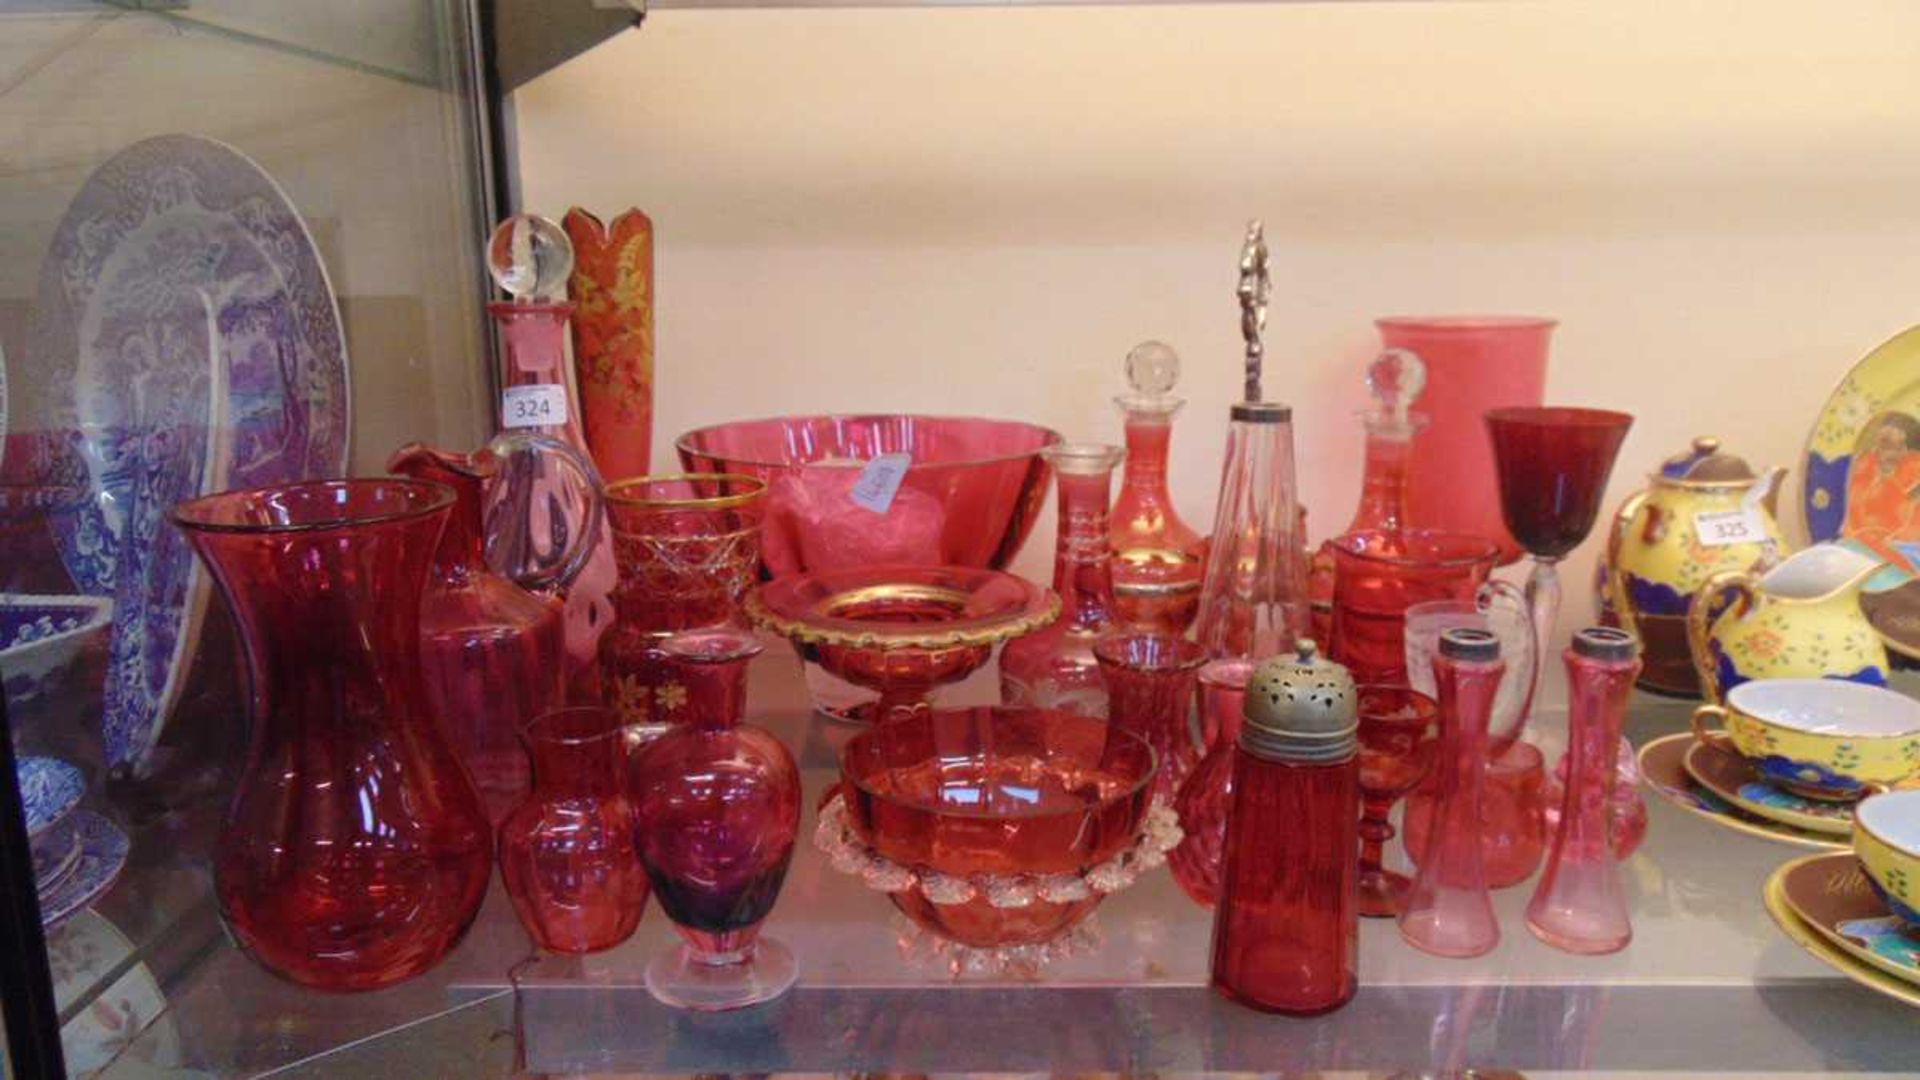 A large assortment of cranberry glassware to include vases, jugs, drinking vessels etc.